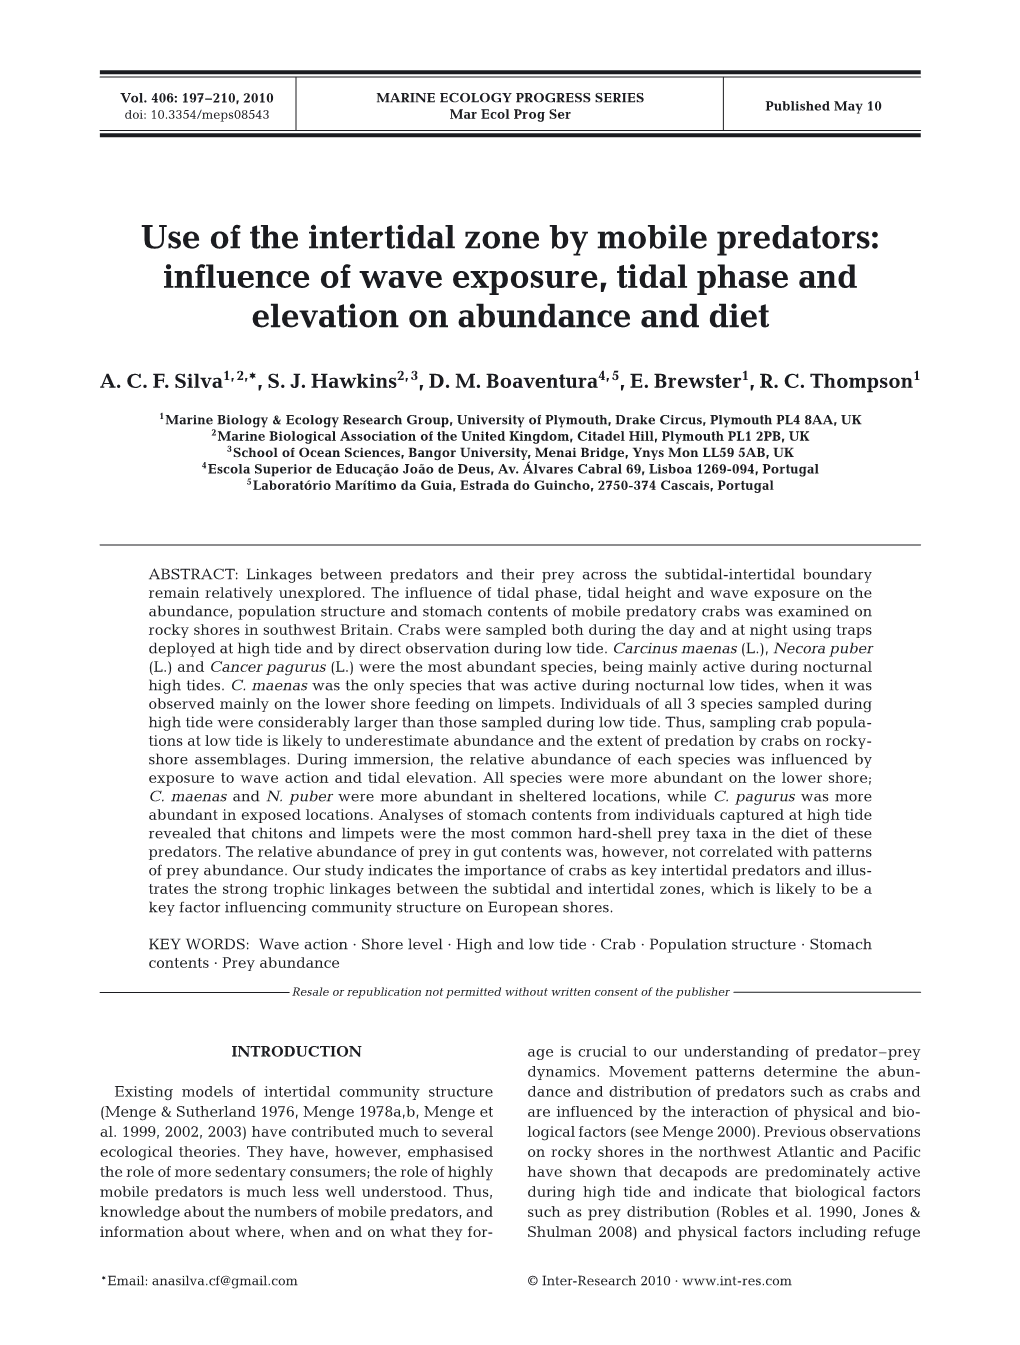 Use of the Intertidal Zone by Mobile Predators: Influence of Wave Exposure, Tidal Phase and Elevation on Abundance and Diet